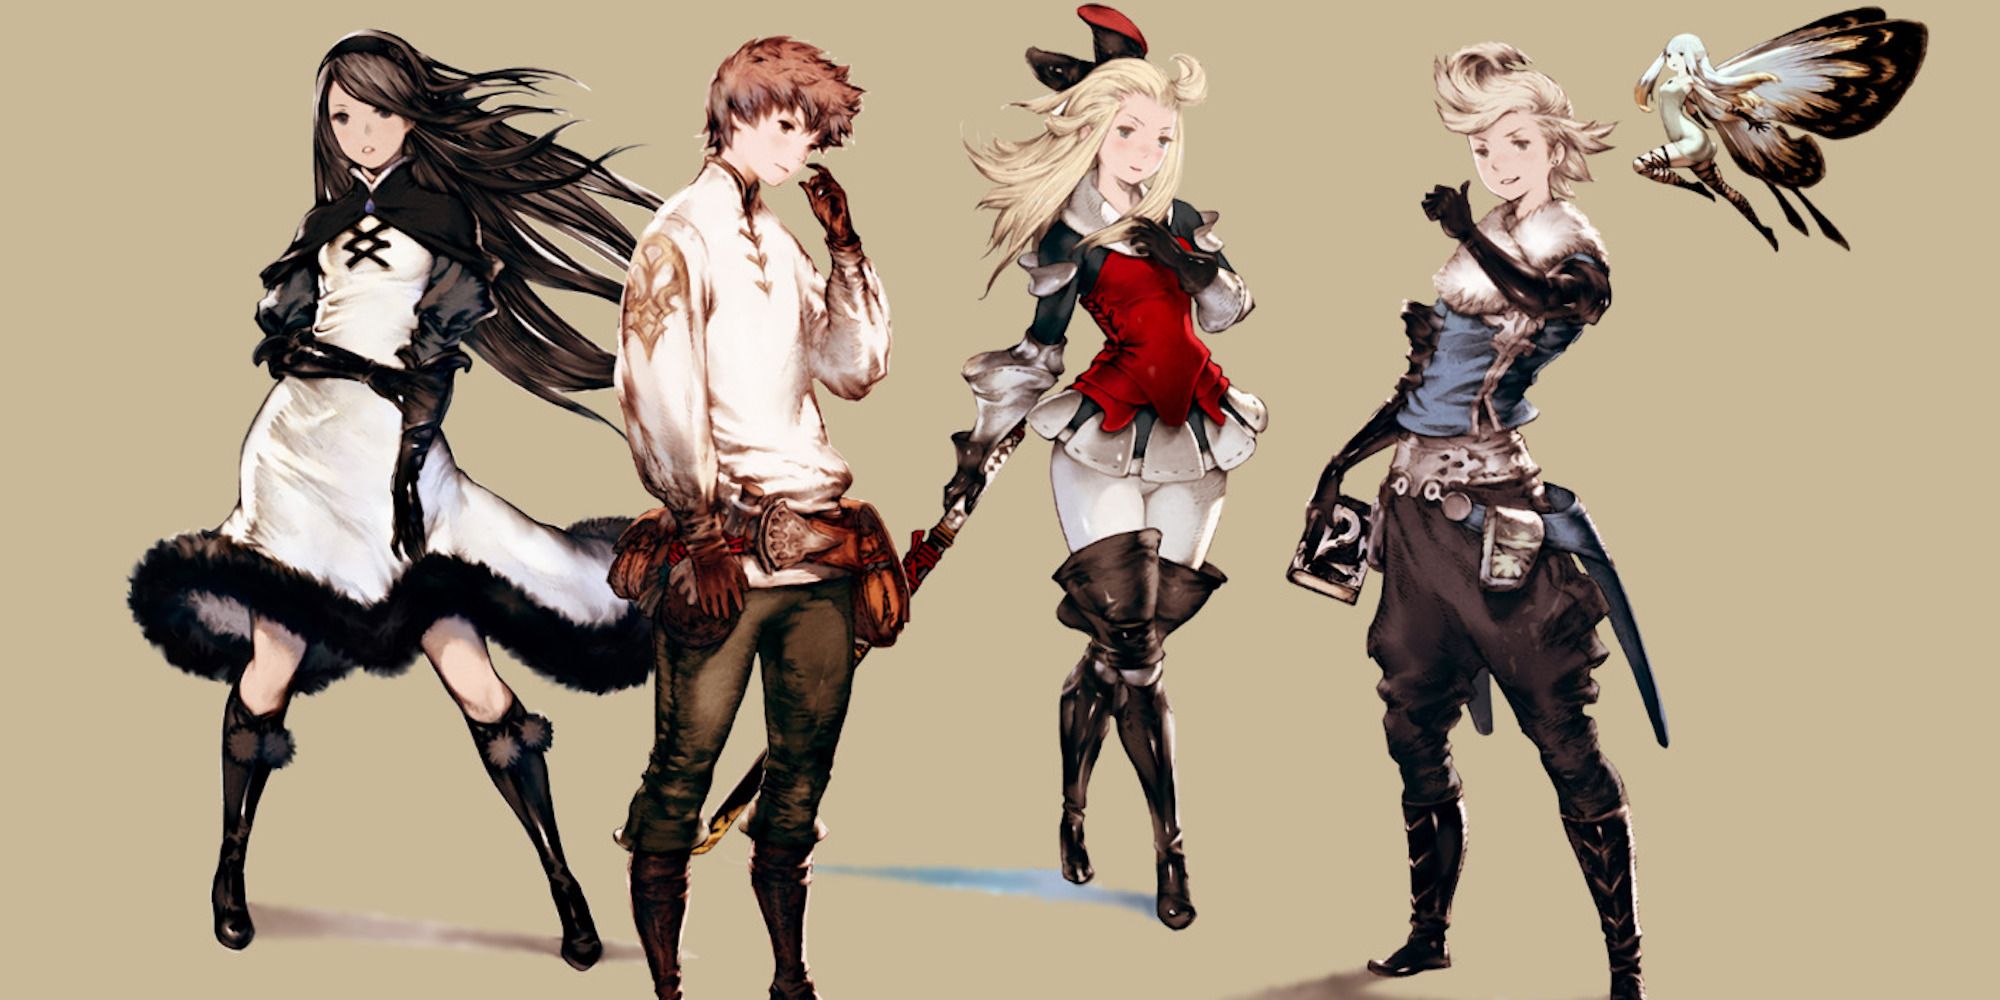 Promo art featuring characters in Bravely Default